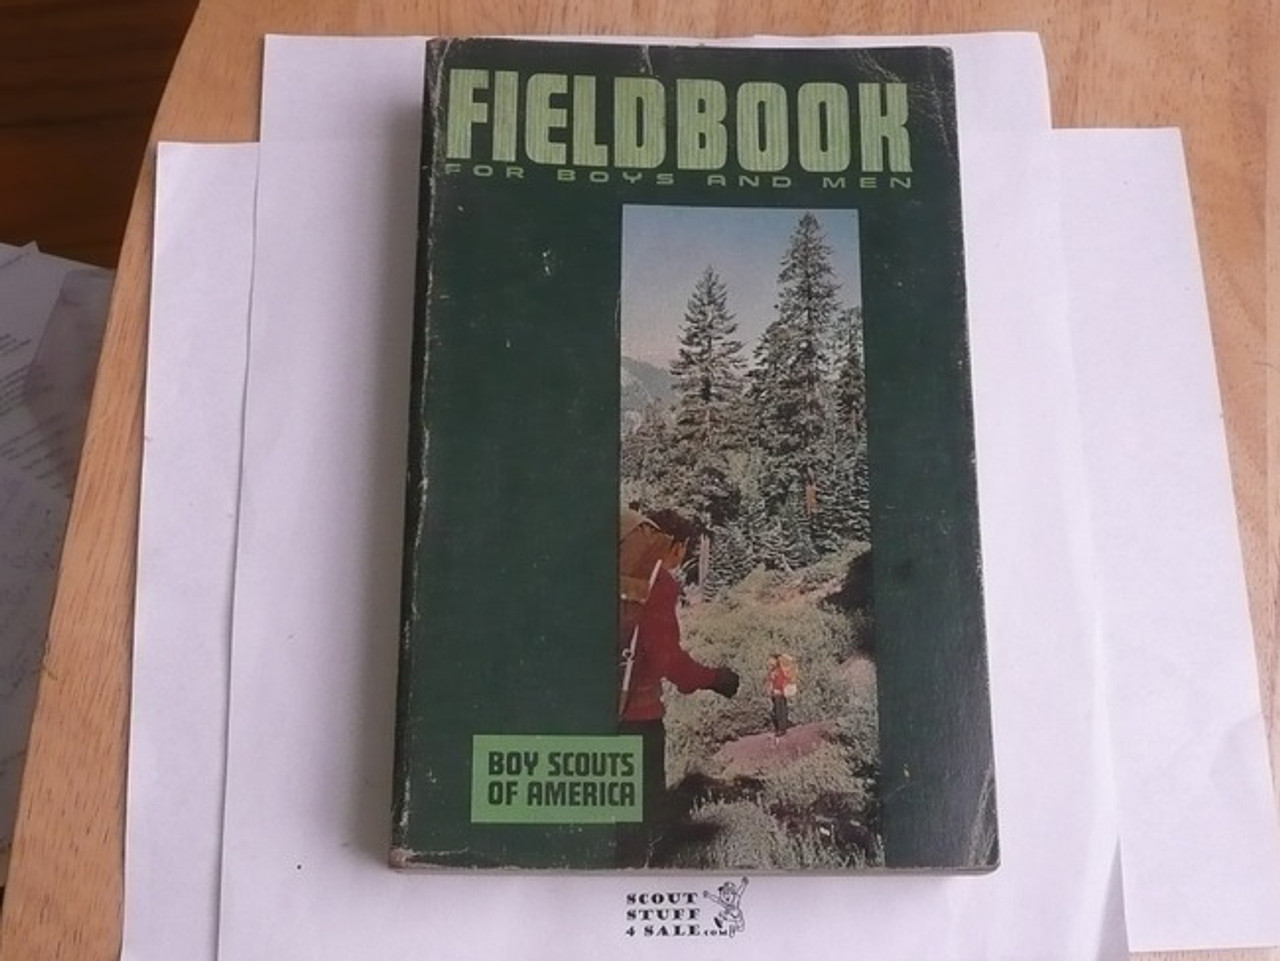 1969 Boy Scout Field Book, Second Edition, lightly used condition